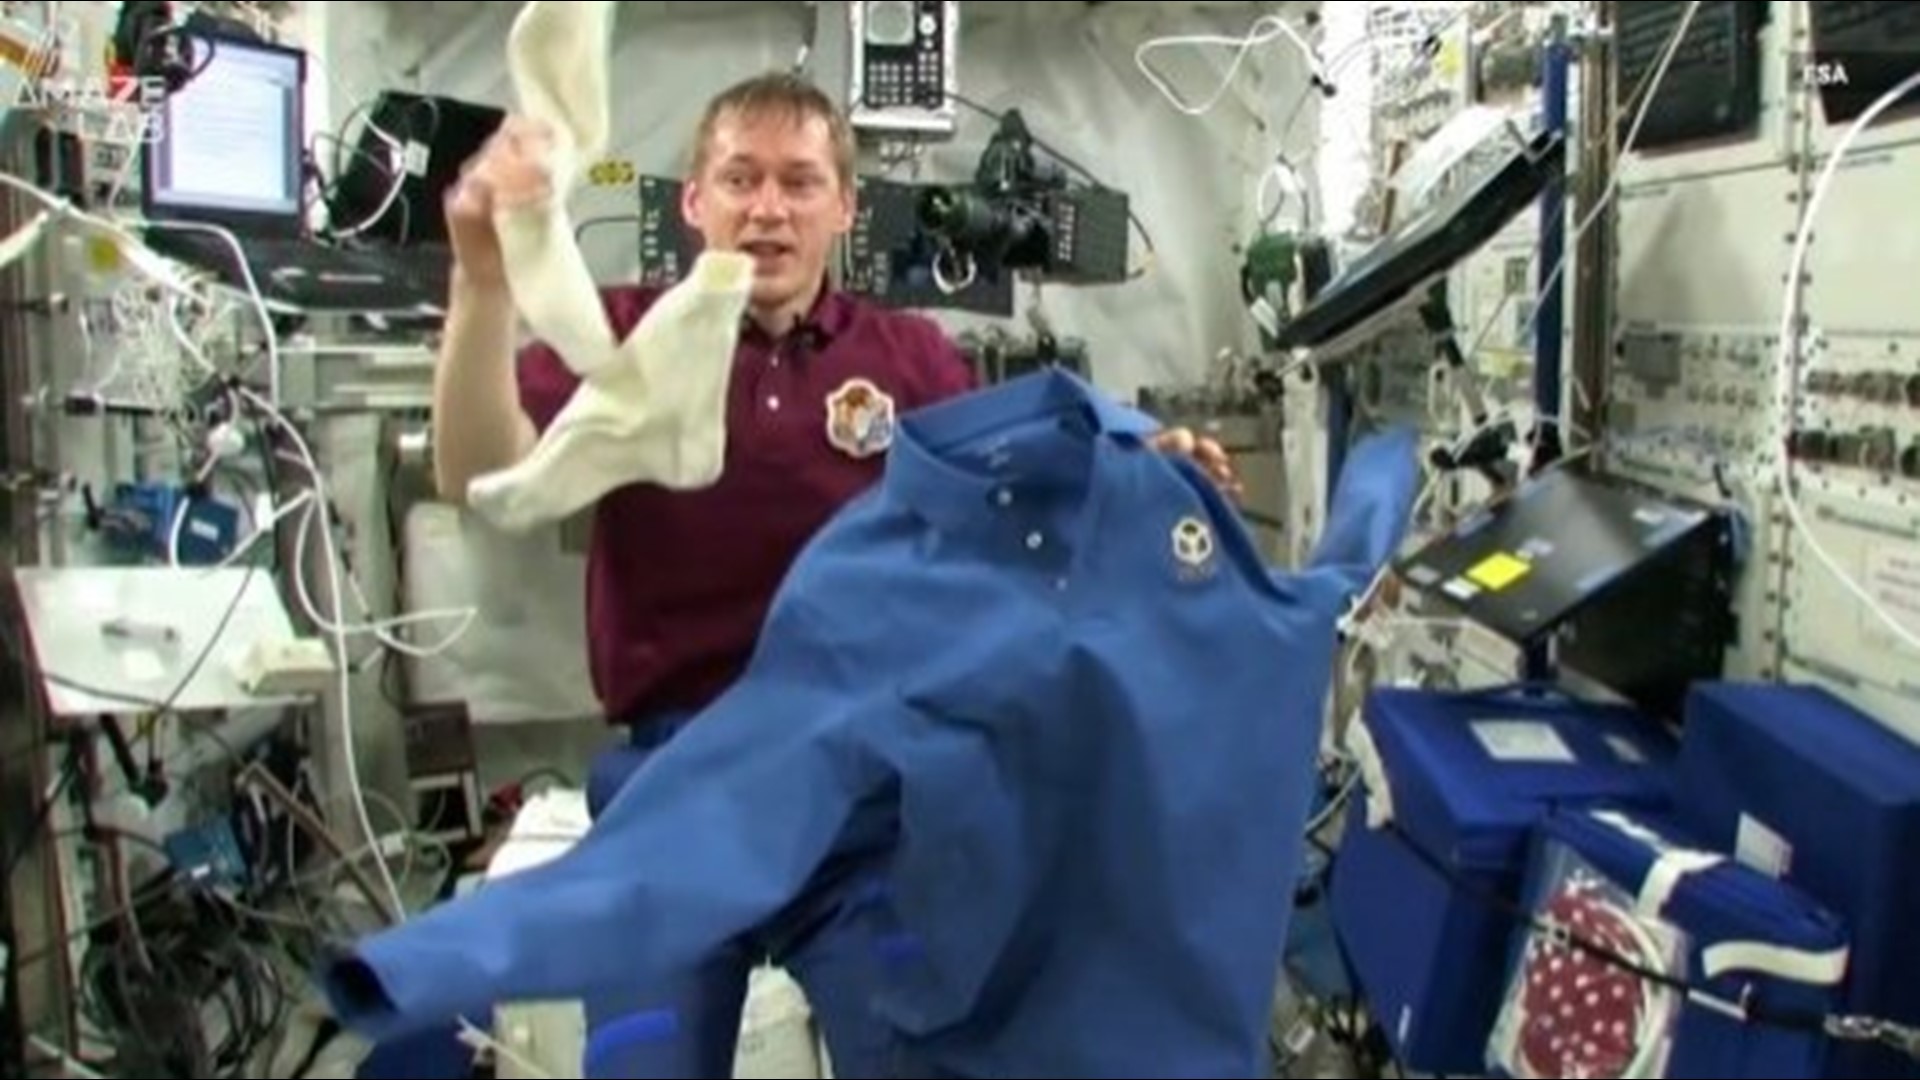 You're not going to believe what astronauts do with their dirty laundry.